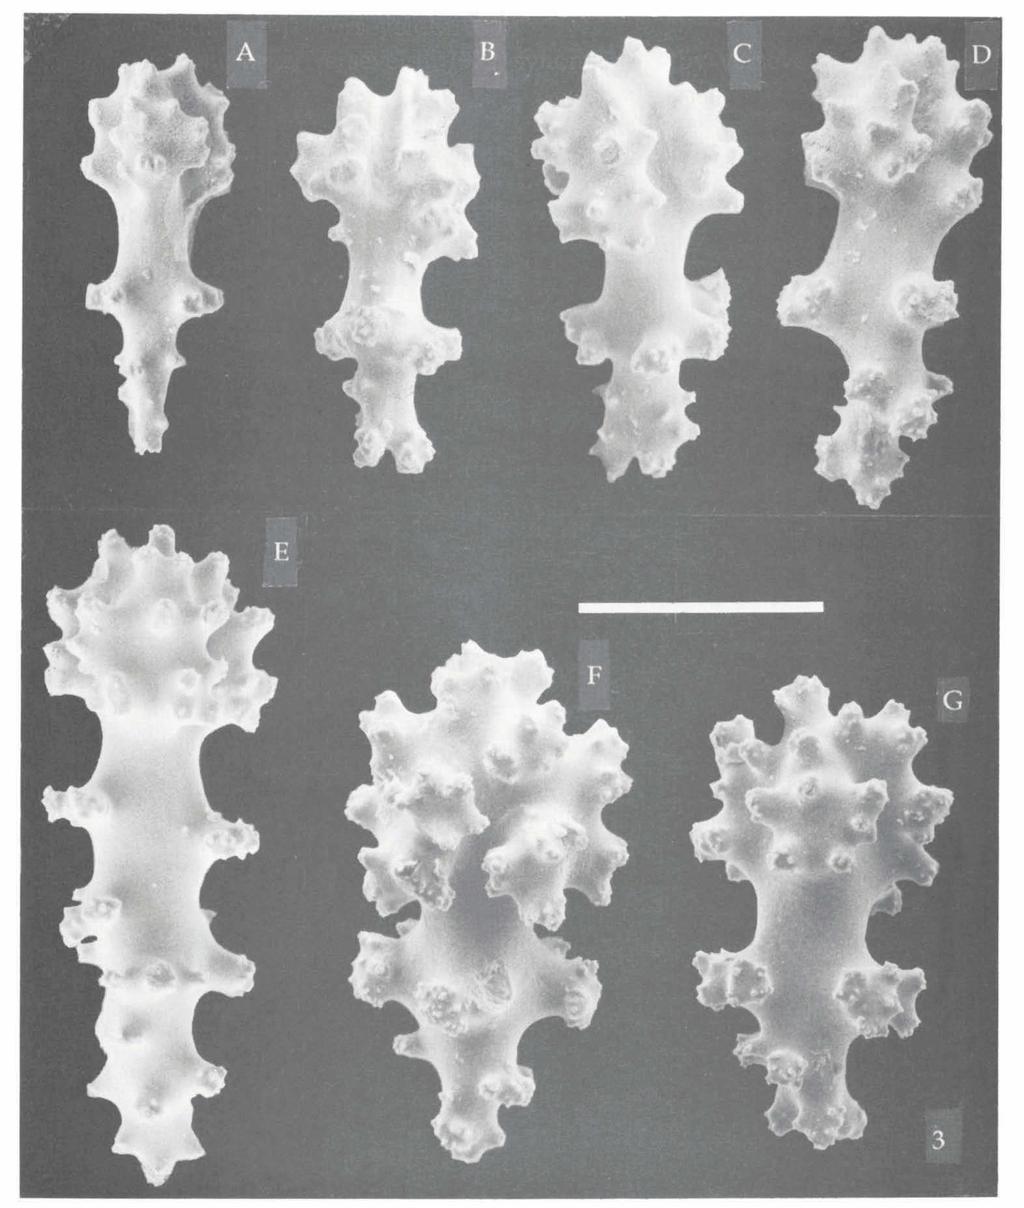 VAN OFWEGEN & VENNAM: OCTOCORALLIA FROM THE LACCADIVES 147 Fig. 3. Sinularia densa (Whitelegge, 1897), specimen from Kavaratti Island (RMNH Coel. no. 17971); sclerites from surface layer of the stalk.